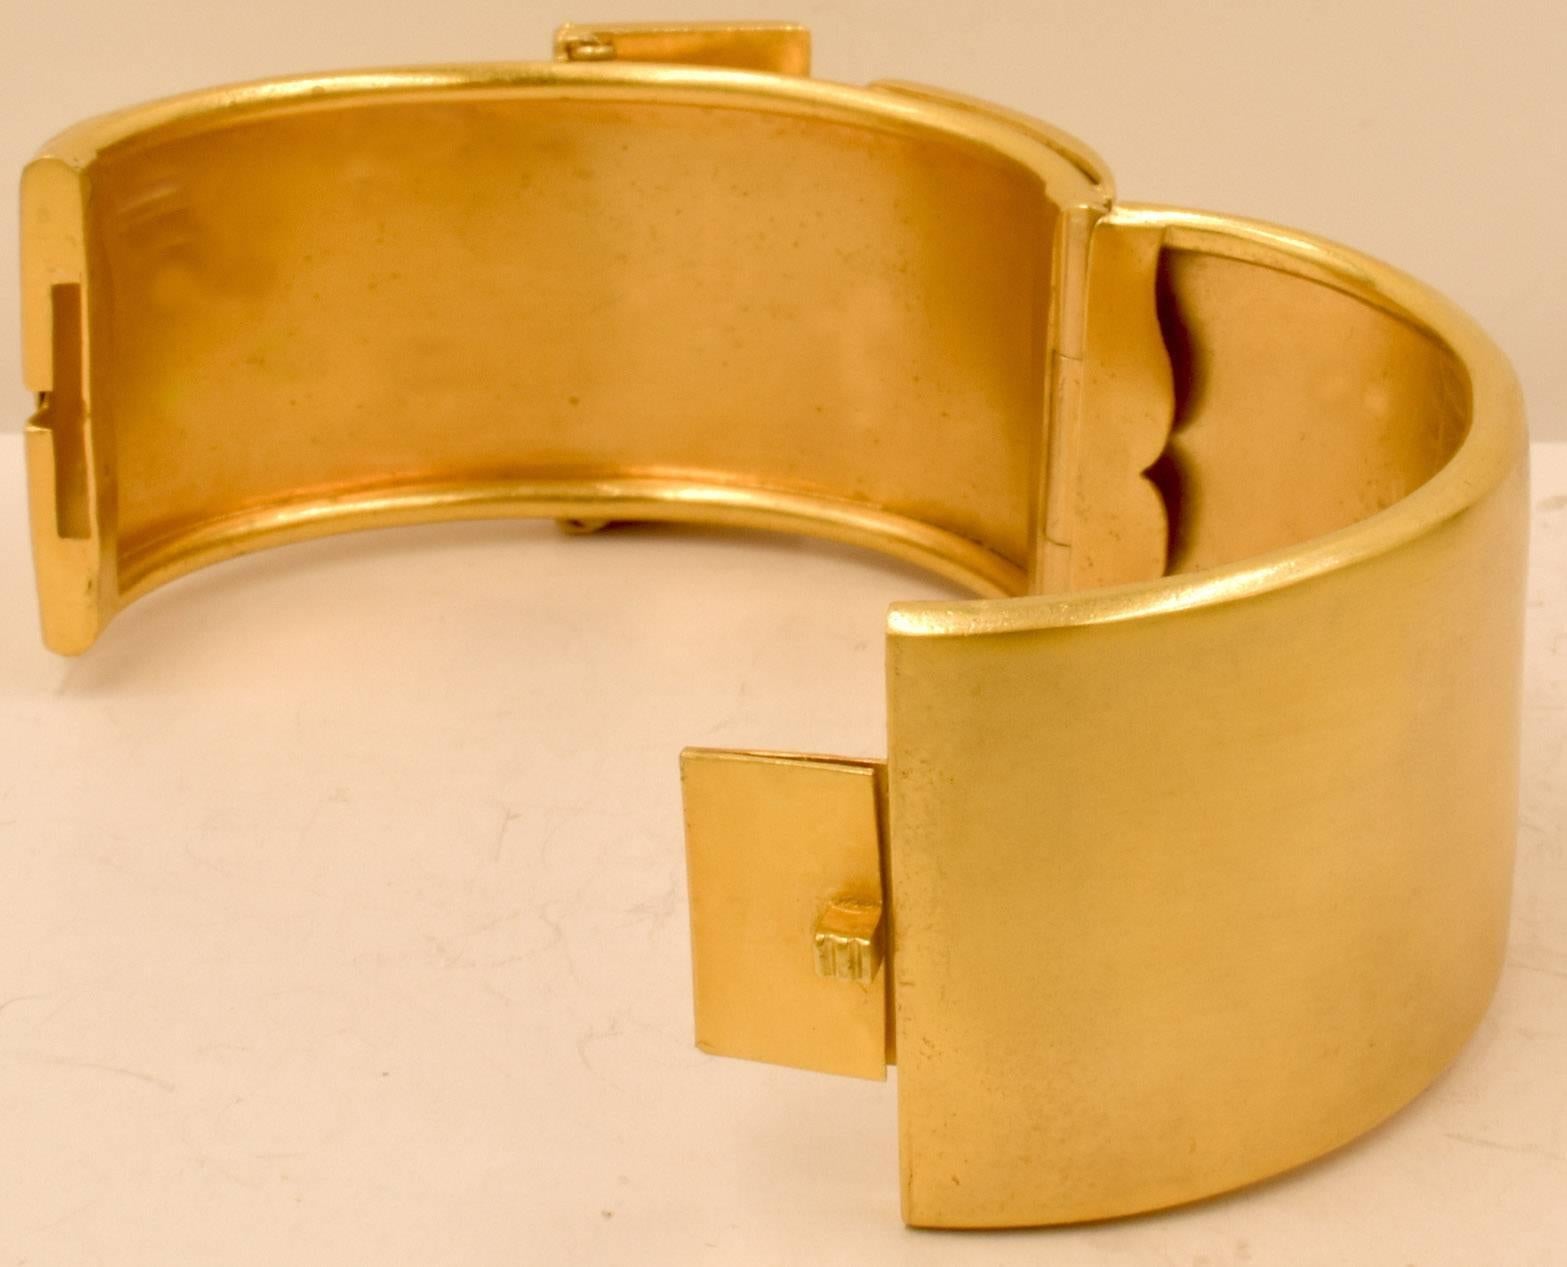 Antique Silver Gilt Buckle Bracelet In Excellent Condition For Sale In Baltimore, MD